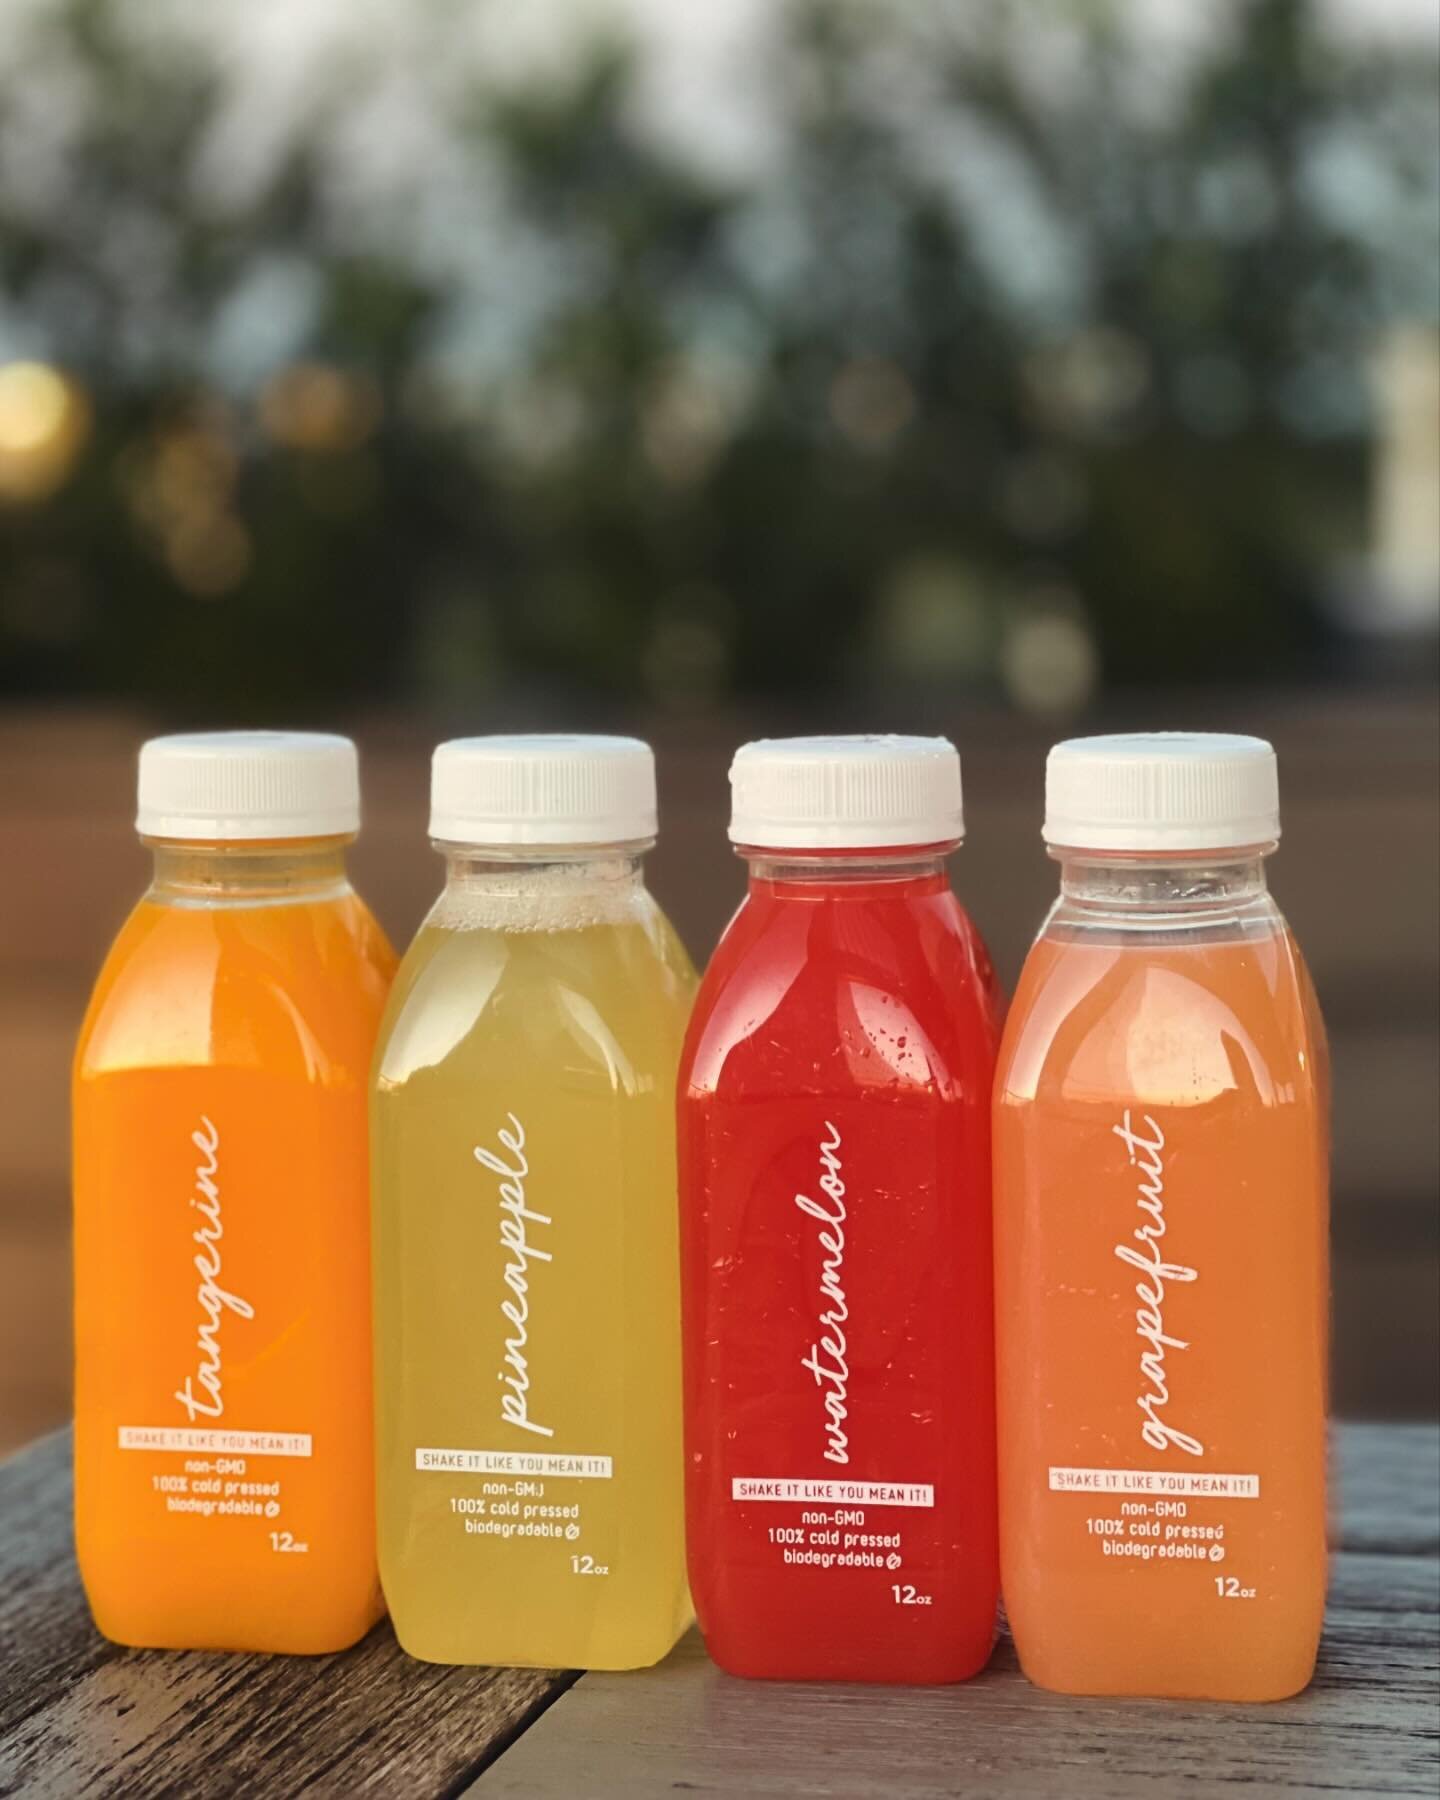 Enjoying a juice can be a great way to rejuvenate after a long day, especially during a ride home.  What&rsquo;s your go to juice or mixer?

#watermelon  #tangerine #pineapple #grapefruit #mixer #fruity #fruit  #coldpressed #freshjuice #local #sustai